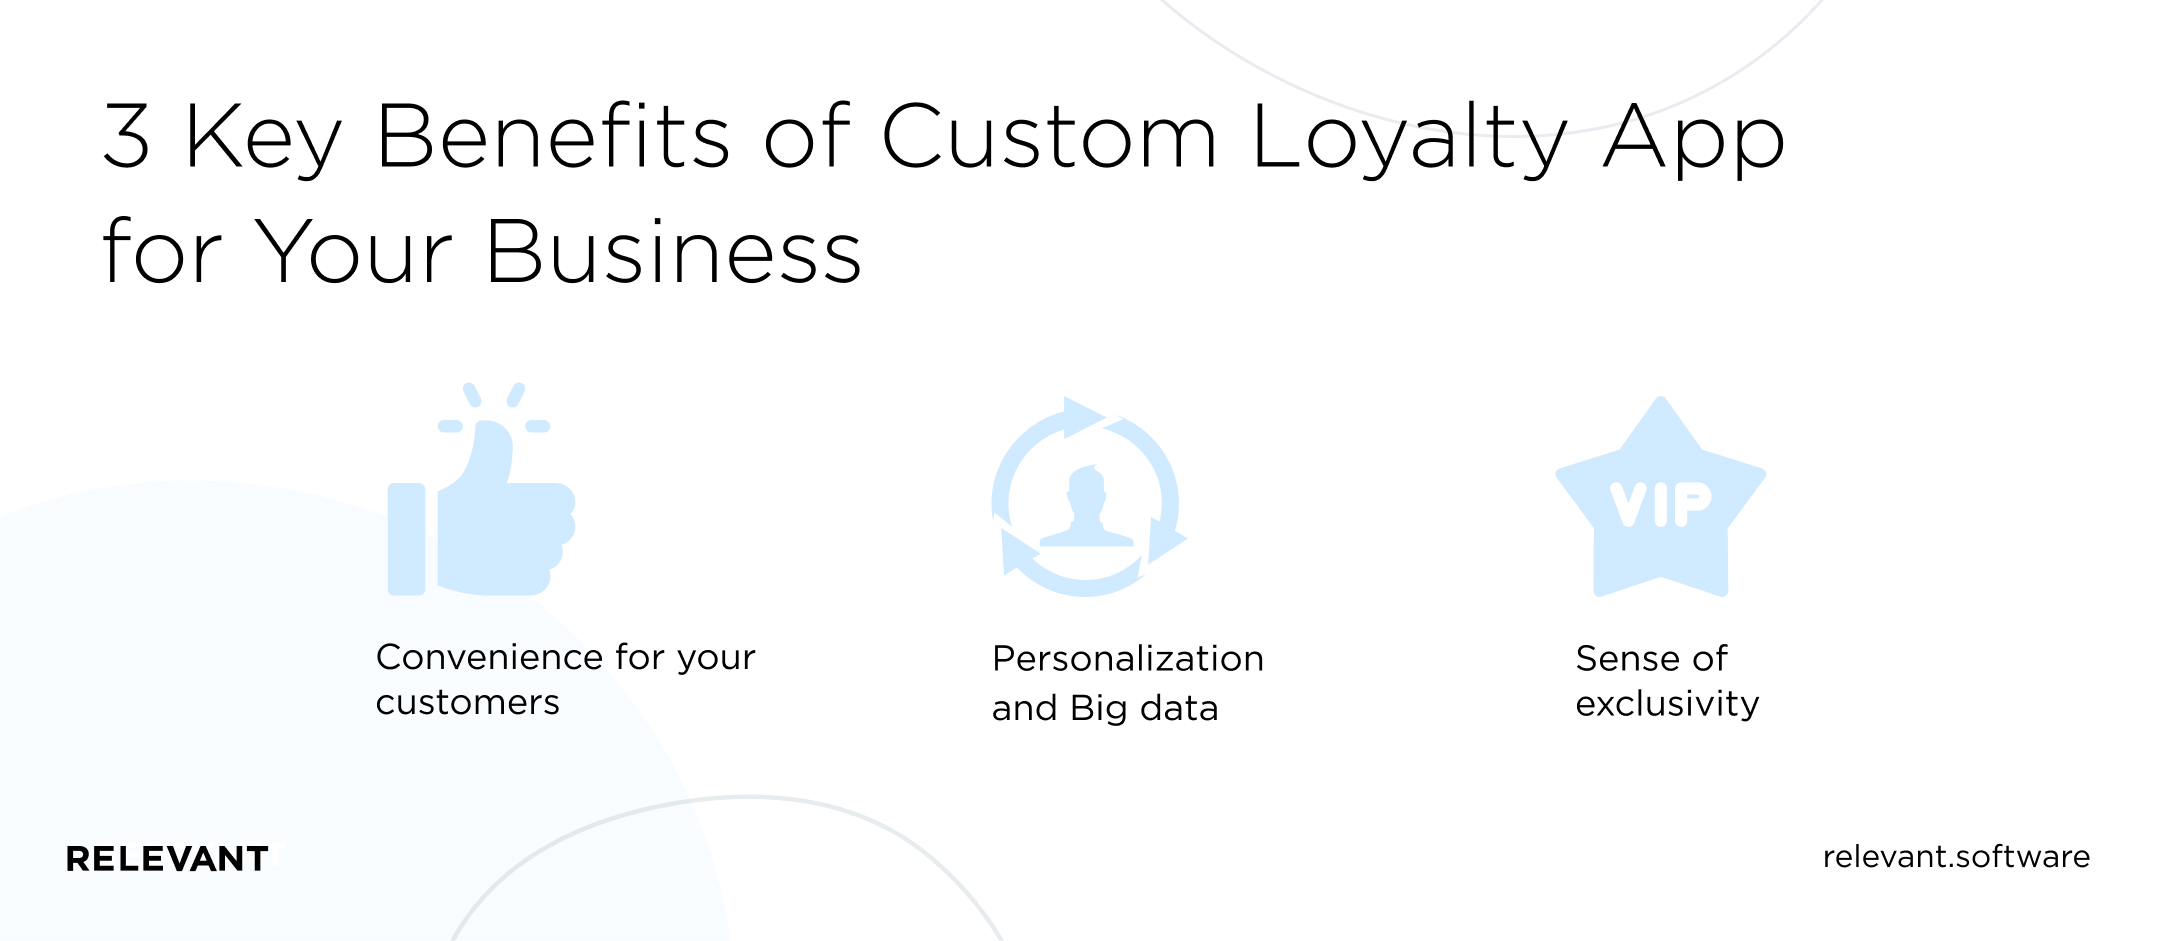 3 Key Benefits of Custom Loyalty App for Your Business